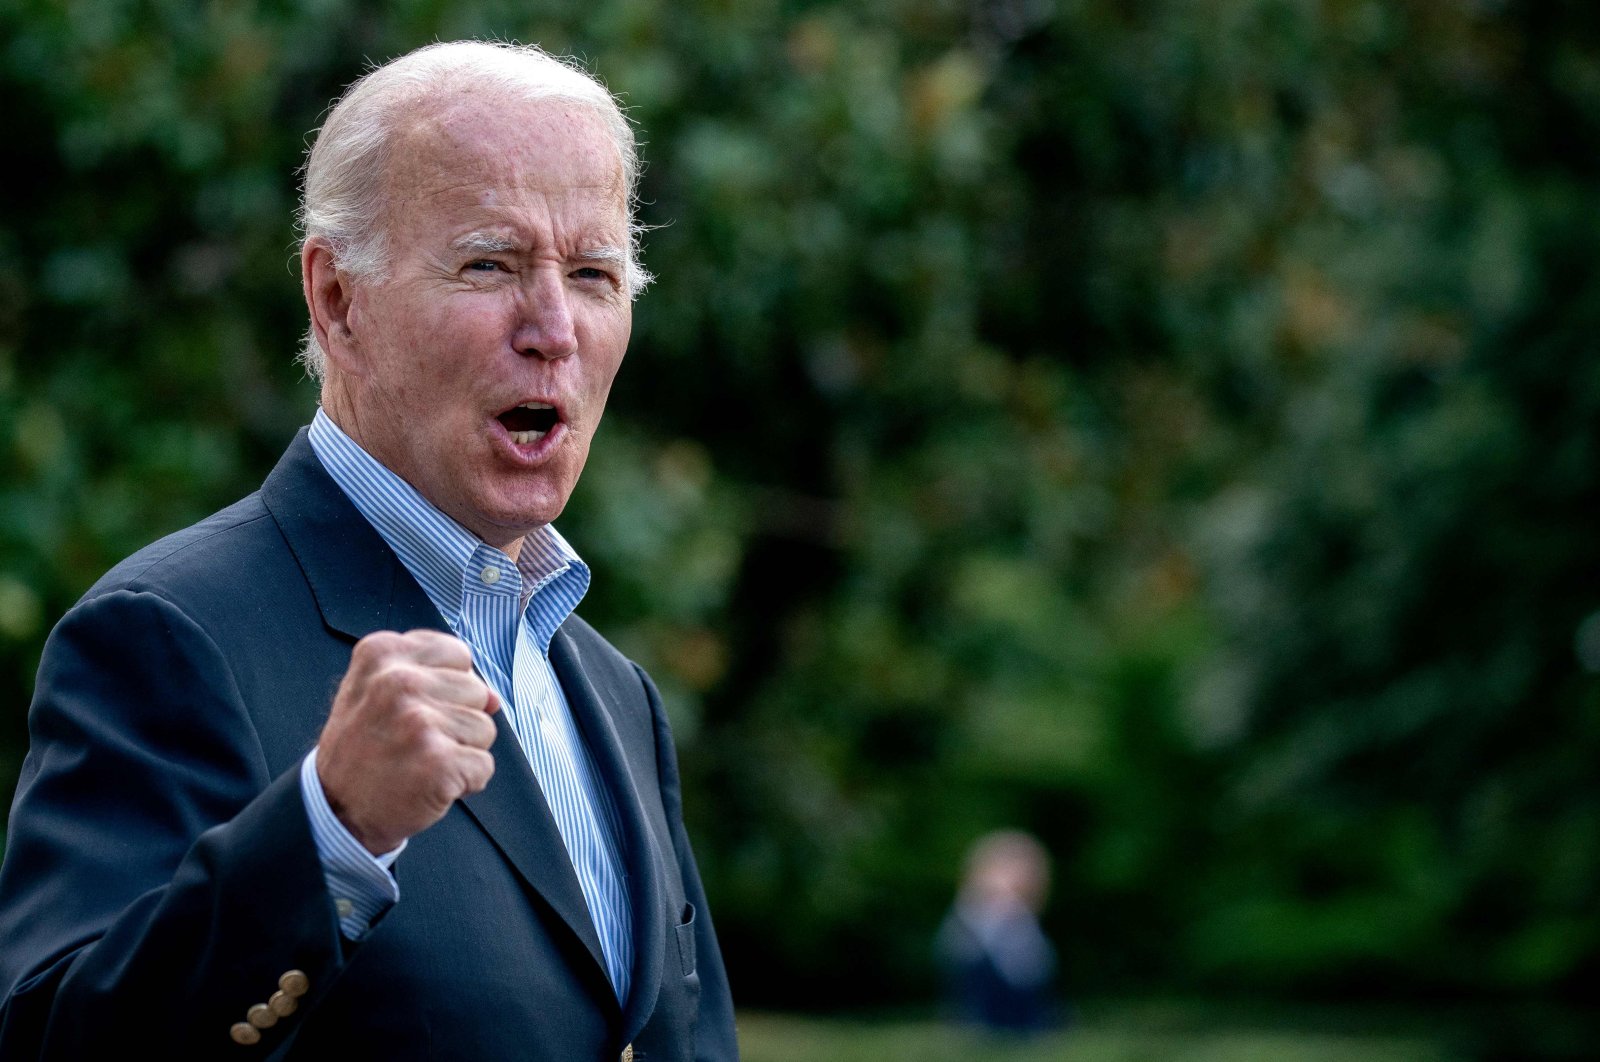 U.S. President Joe Biden answers a shouted question from a reporter while walking to Marine One on the South Lawn of the White House in Washington, DC, U.S., on Aug. 7, 2022. (AFP Photo)